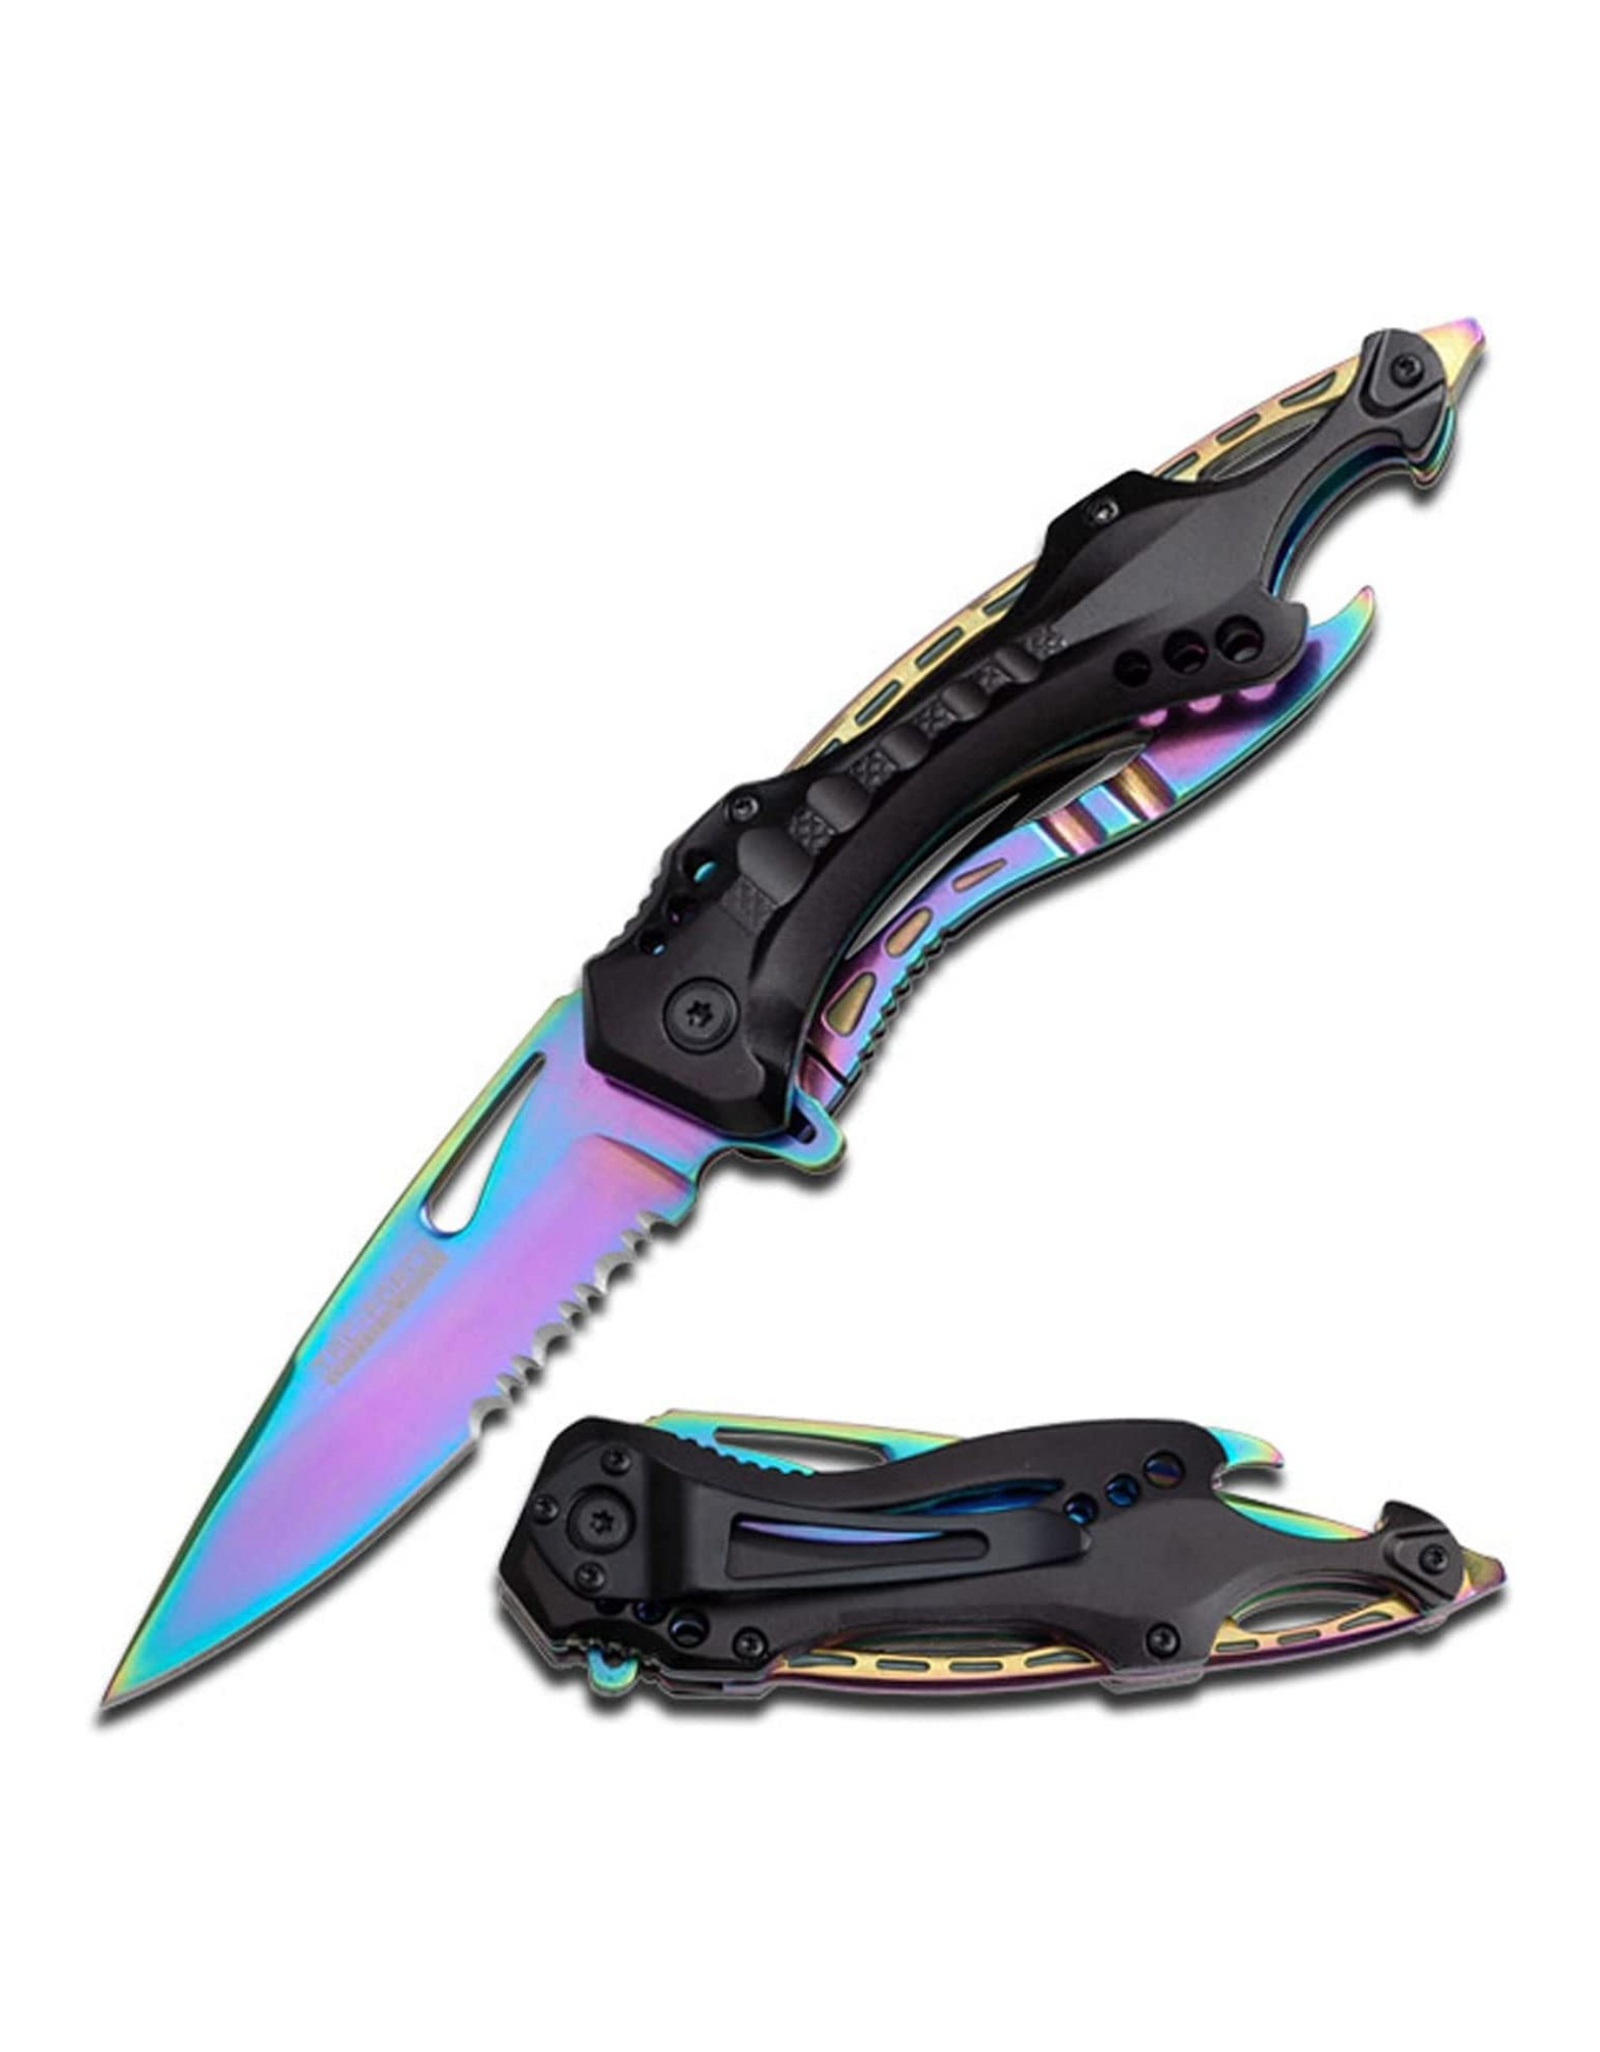 Tac-Force- Spring Assisted Folding Pocket Knife, Rainbow TiNite Coated Stainless Steel Blade with Black Aluminum Handle, 3.25" Blade